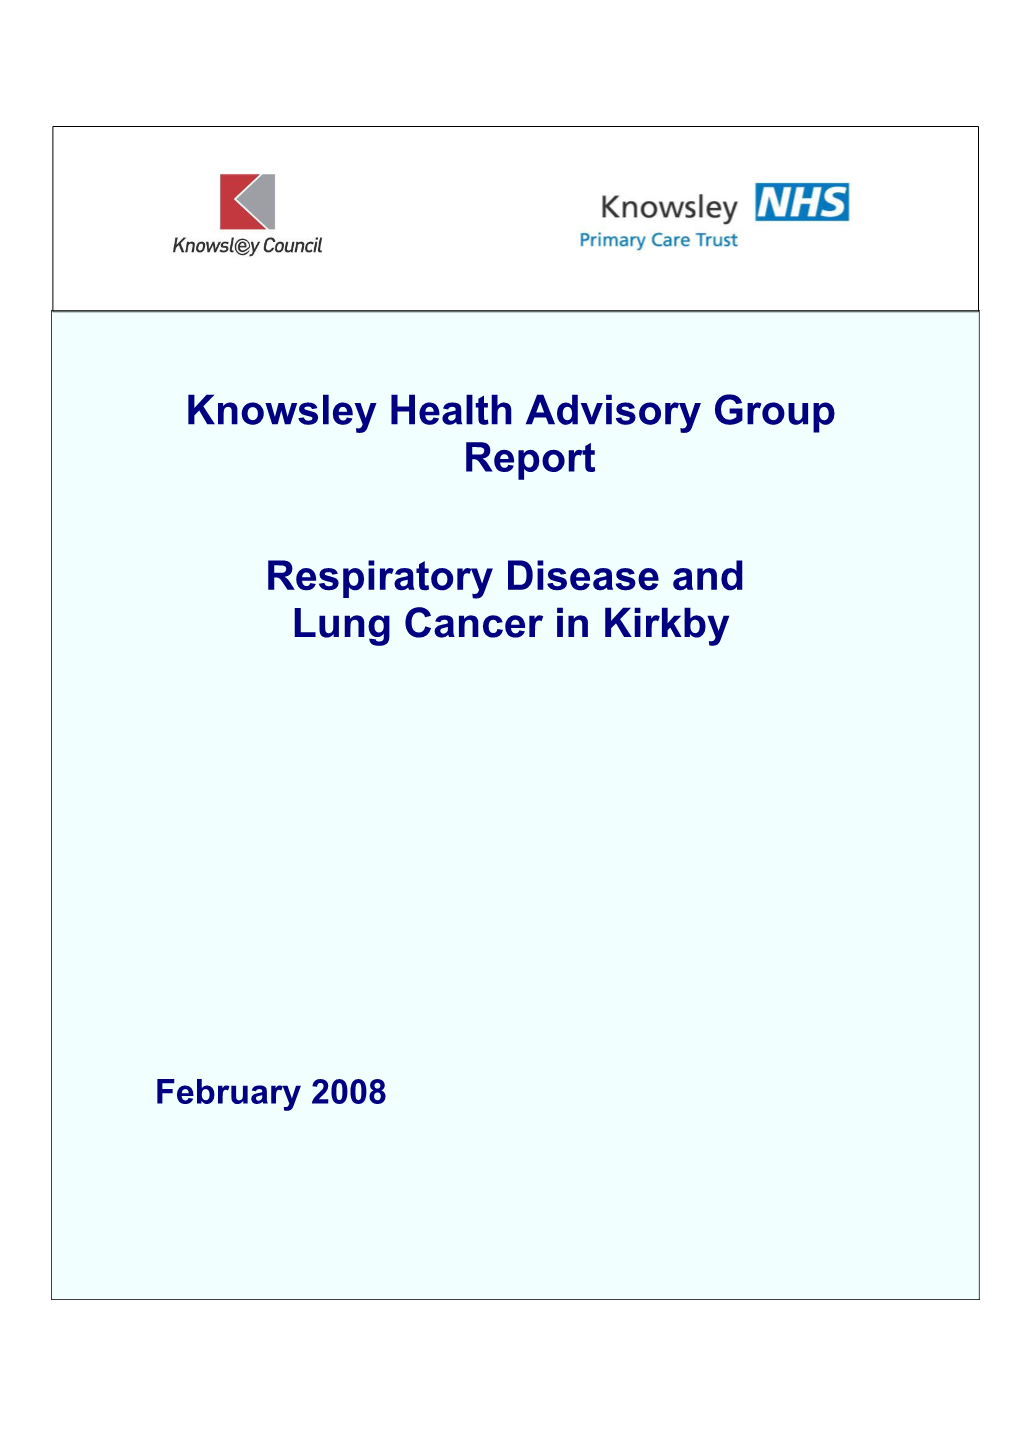 Knowsley Health Advisory Group Report